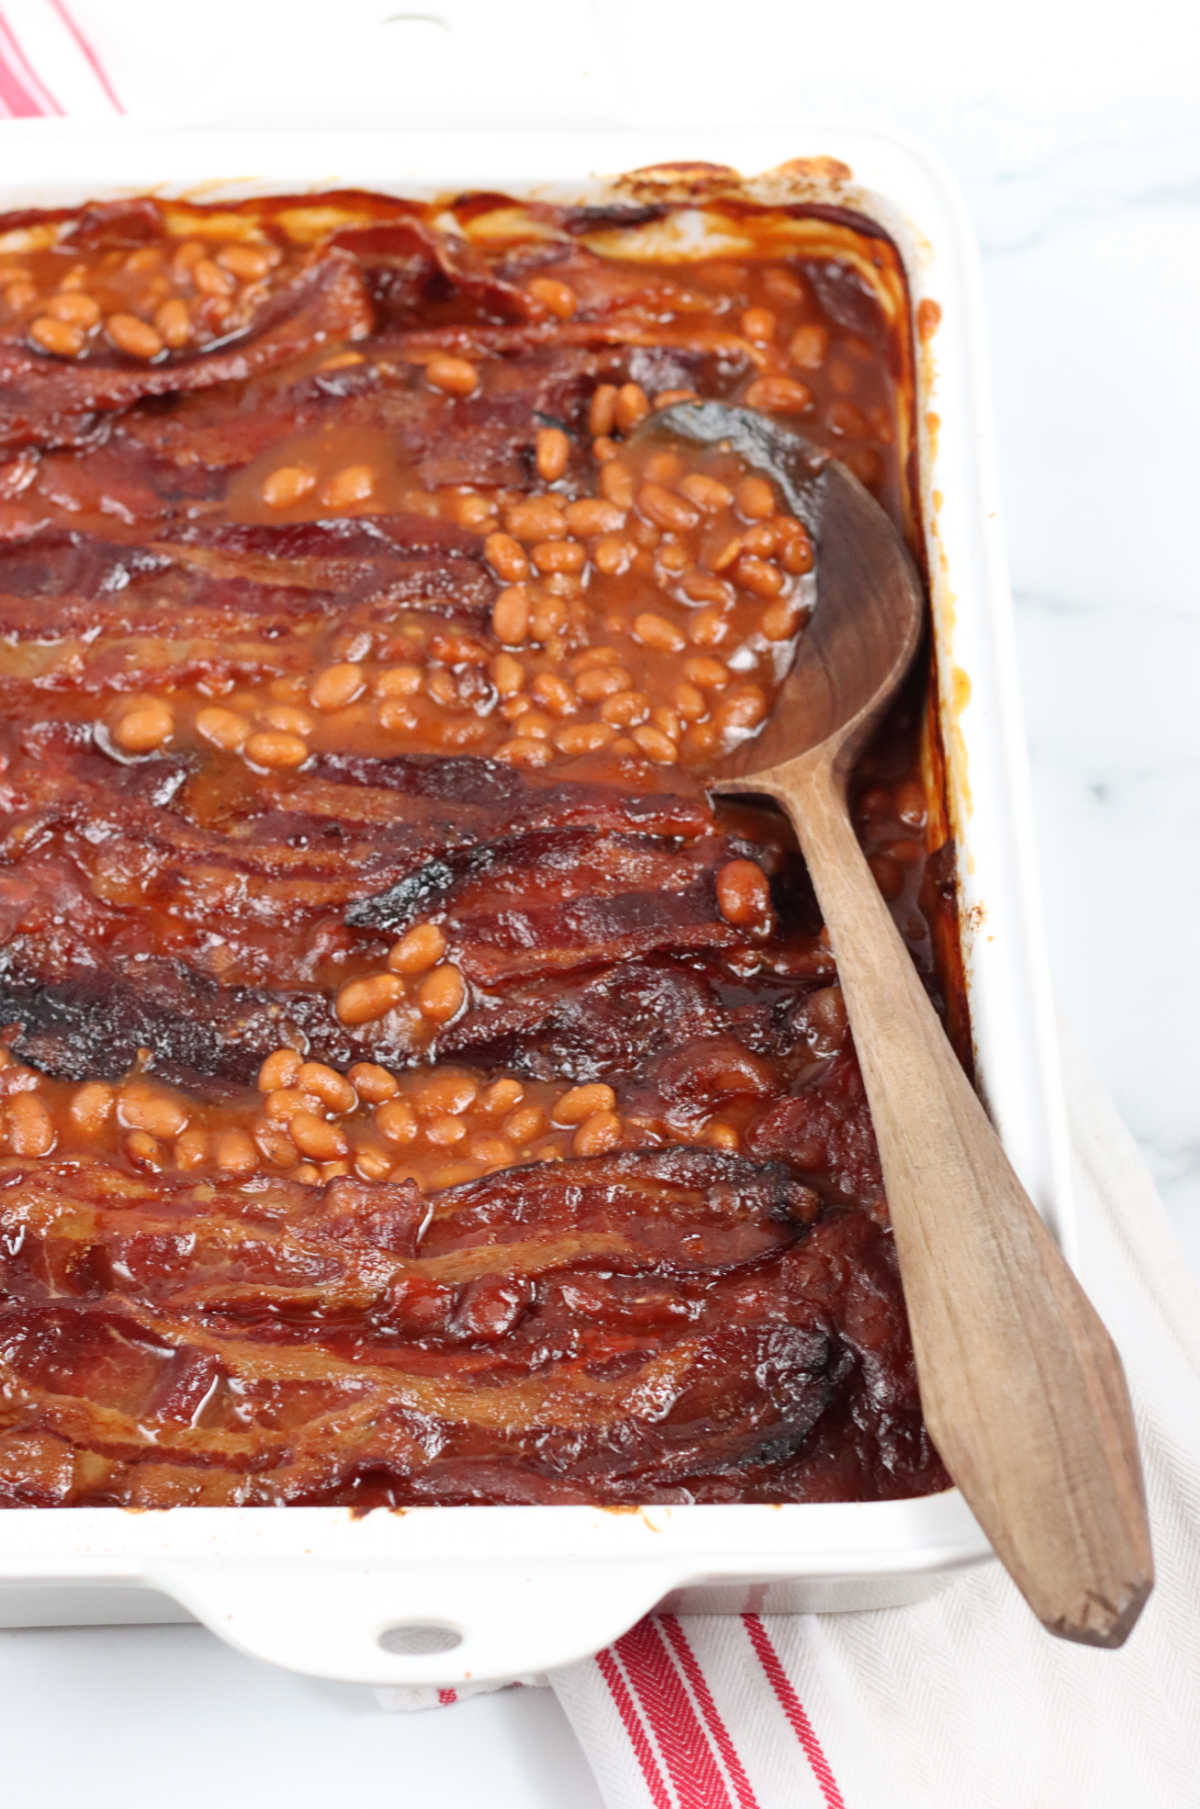 Baked beans in white rectangle baking dish, wooden spoon on right side of pan.